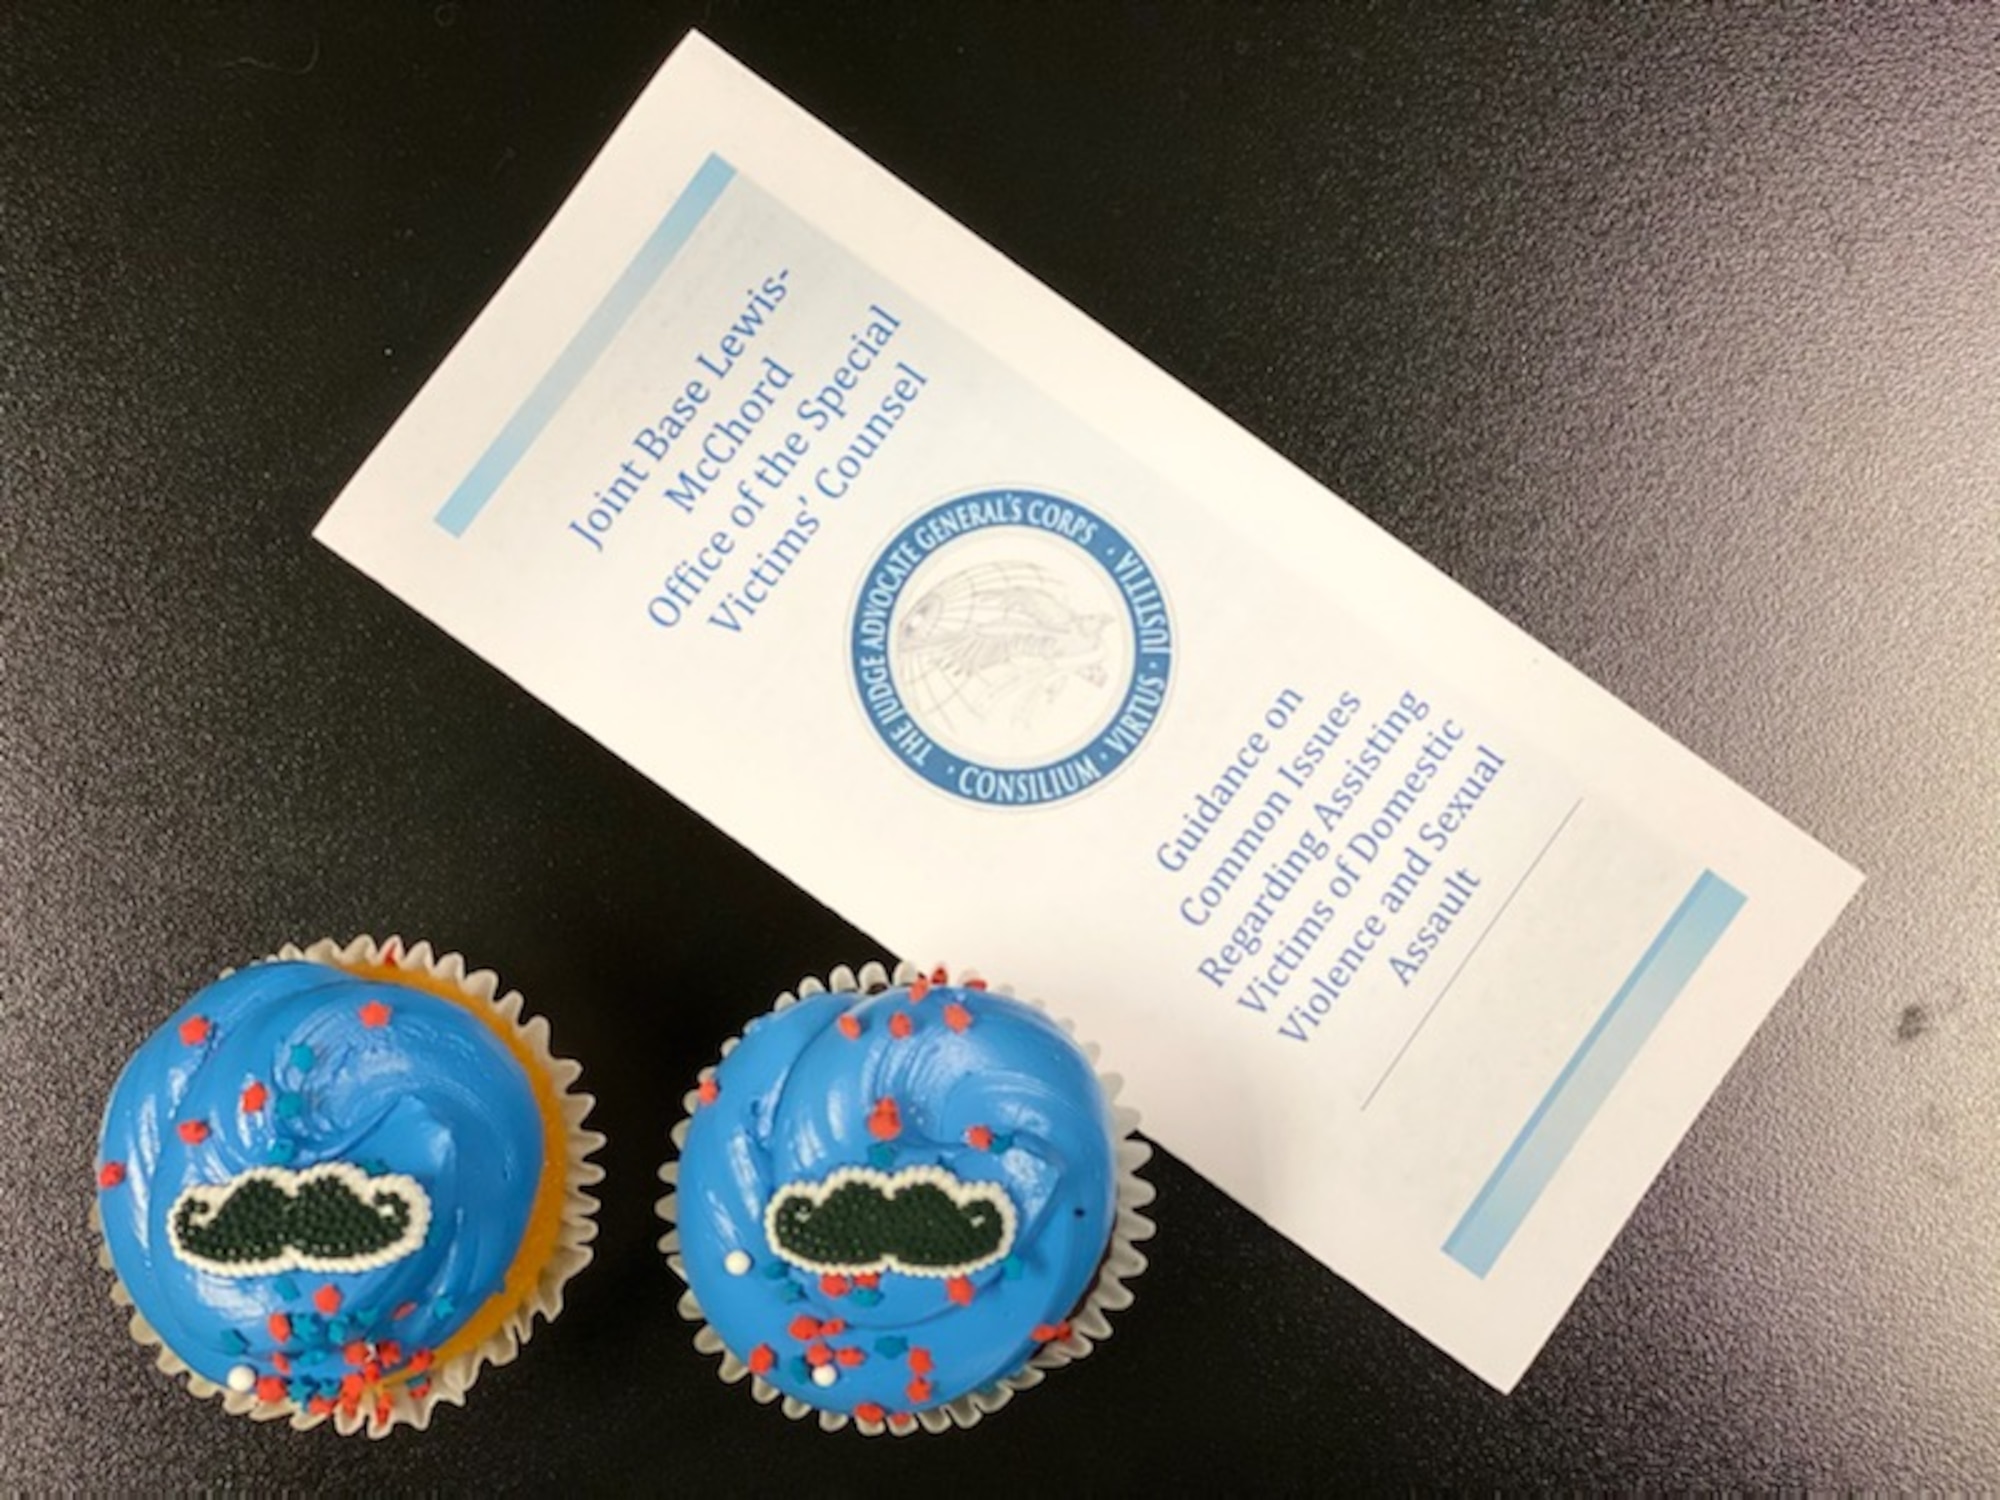 A pamphlet for the Joint Base Lewis-McChord Special Victim's Counsel lies on a table next to blue cupcakes with moustache decorations.